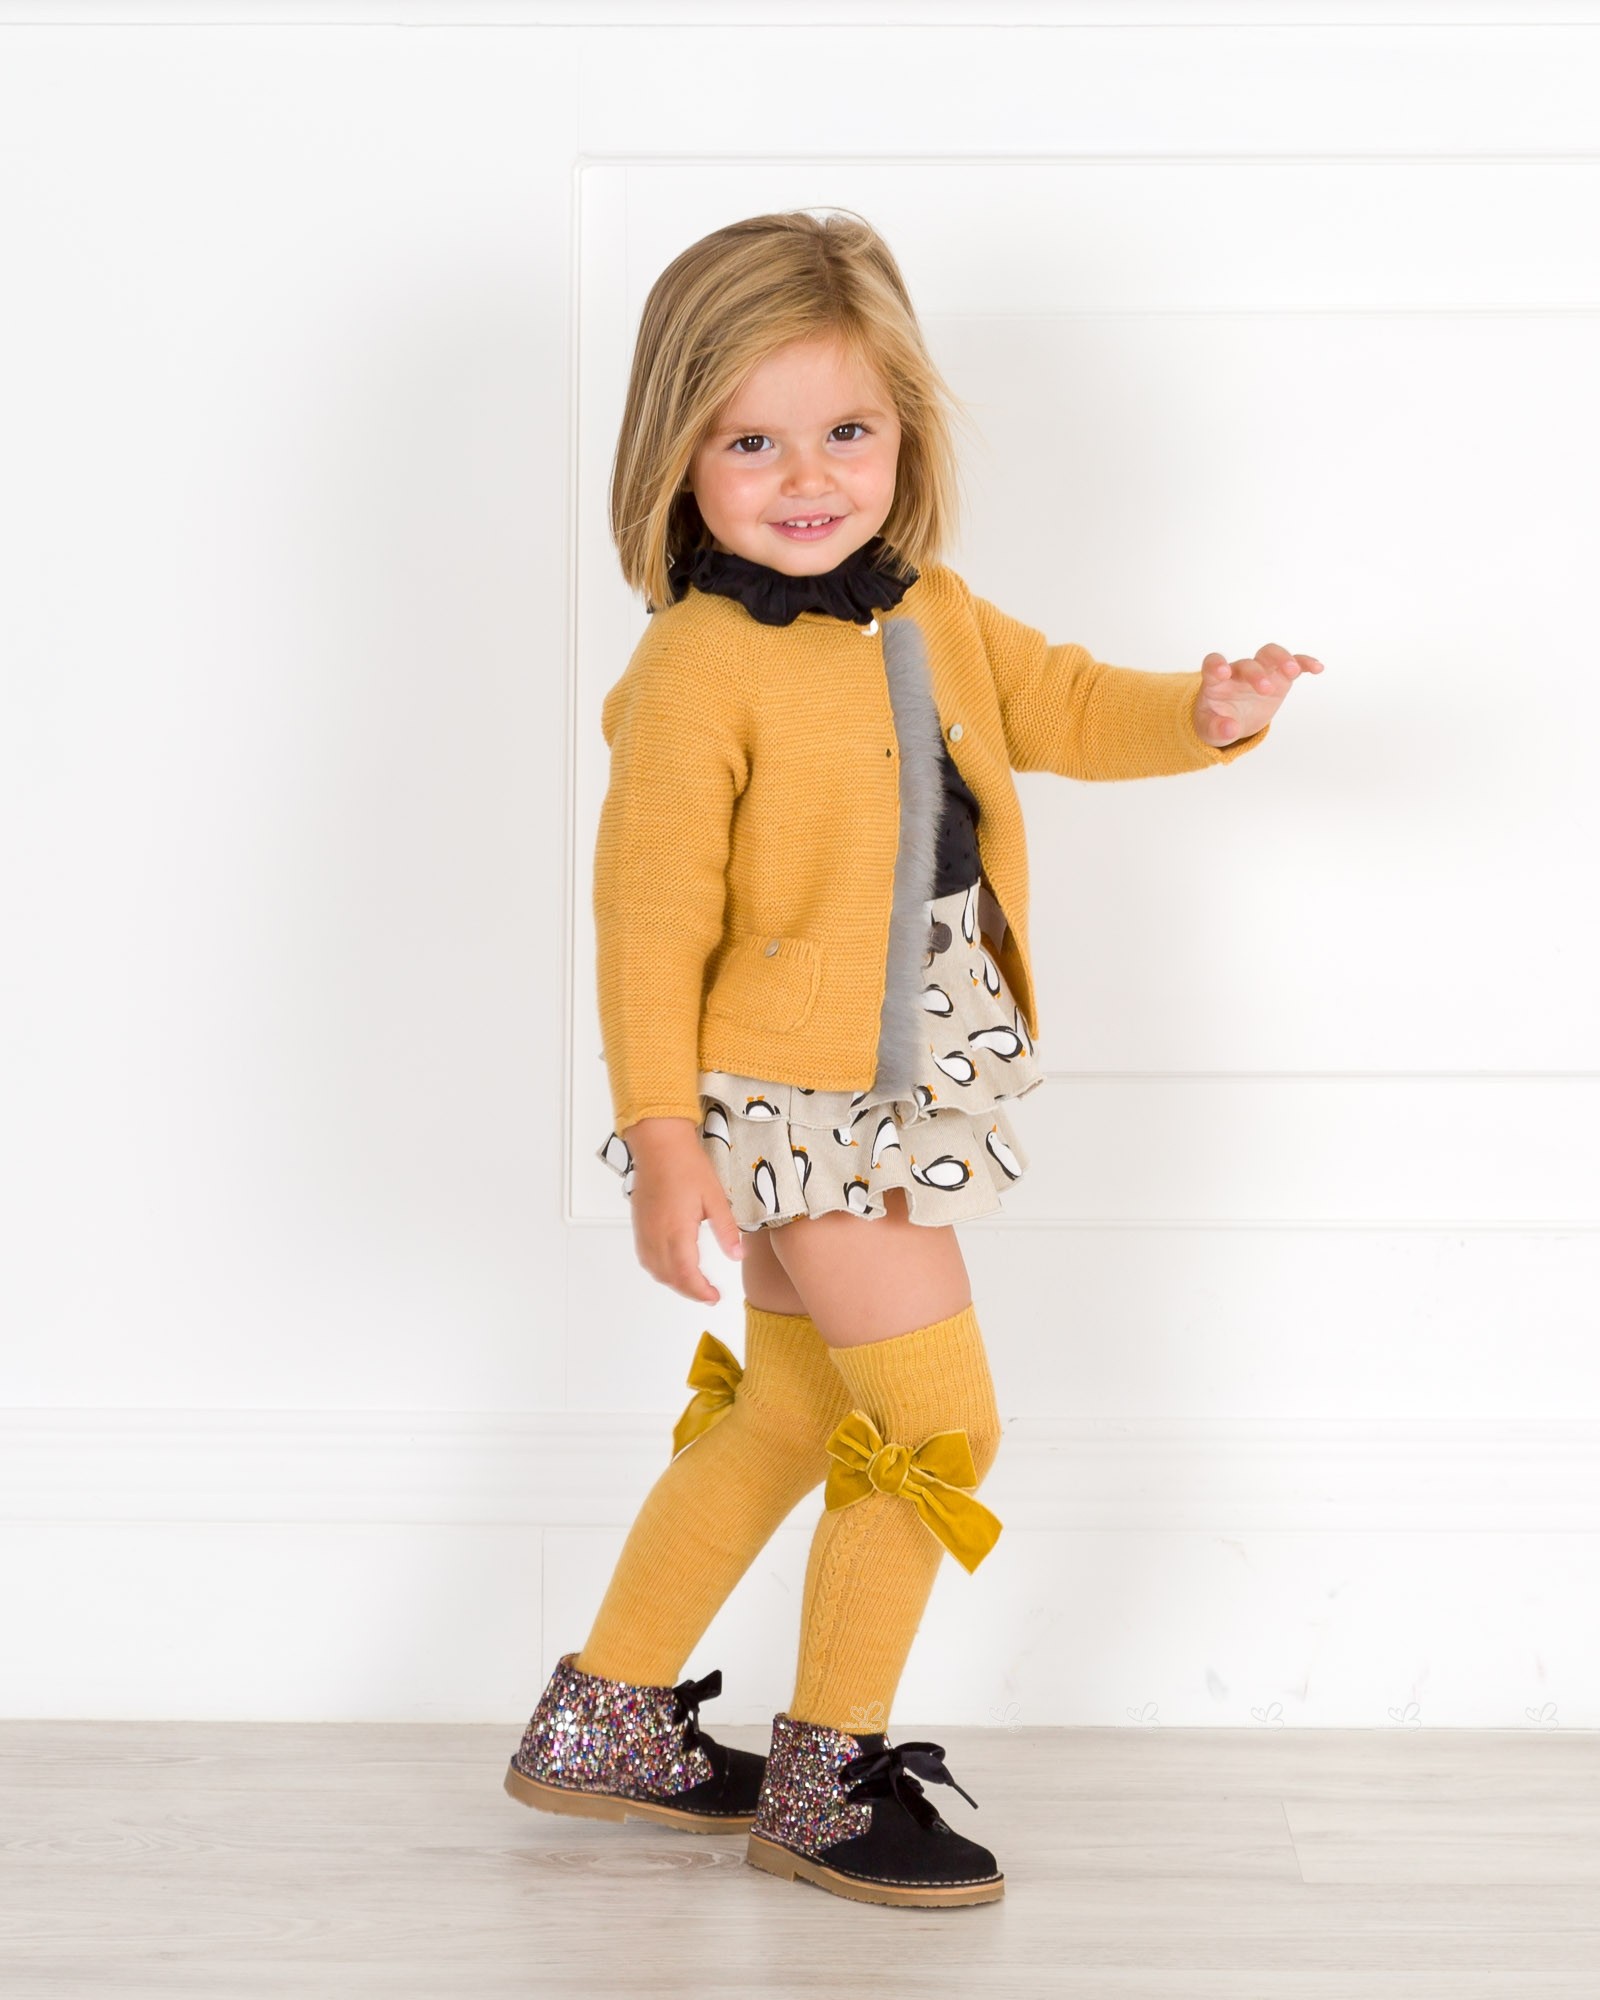 Penguin Dungaree Shorts Set Outfit & Mustard Knitted Cardigan | Missbaby